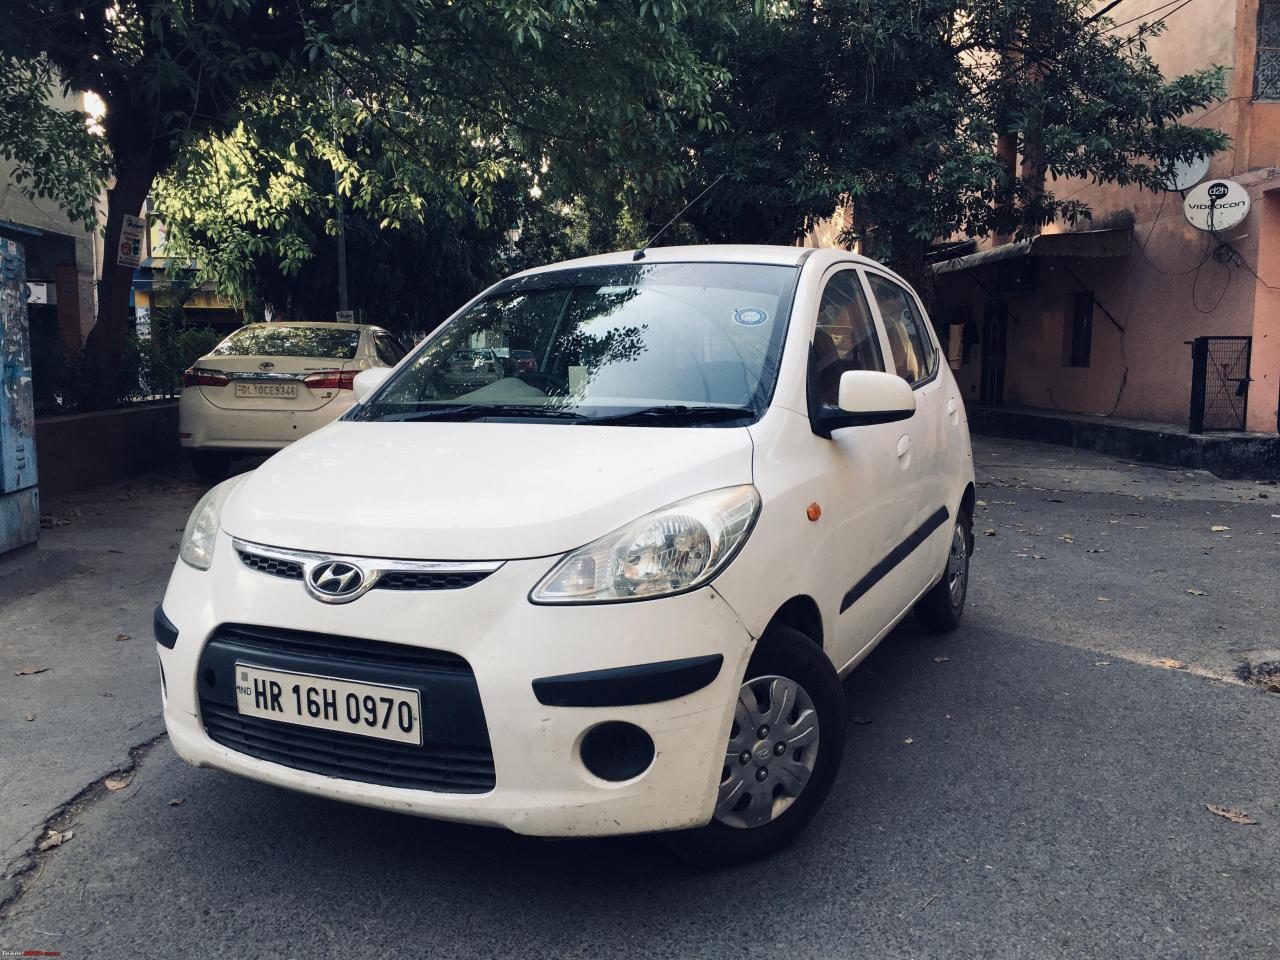 Why I sold my used Hyundai i10 after just 3 years of ownership